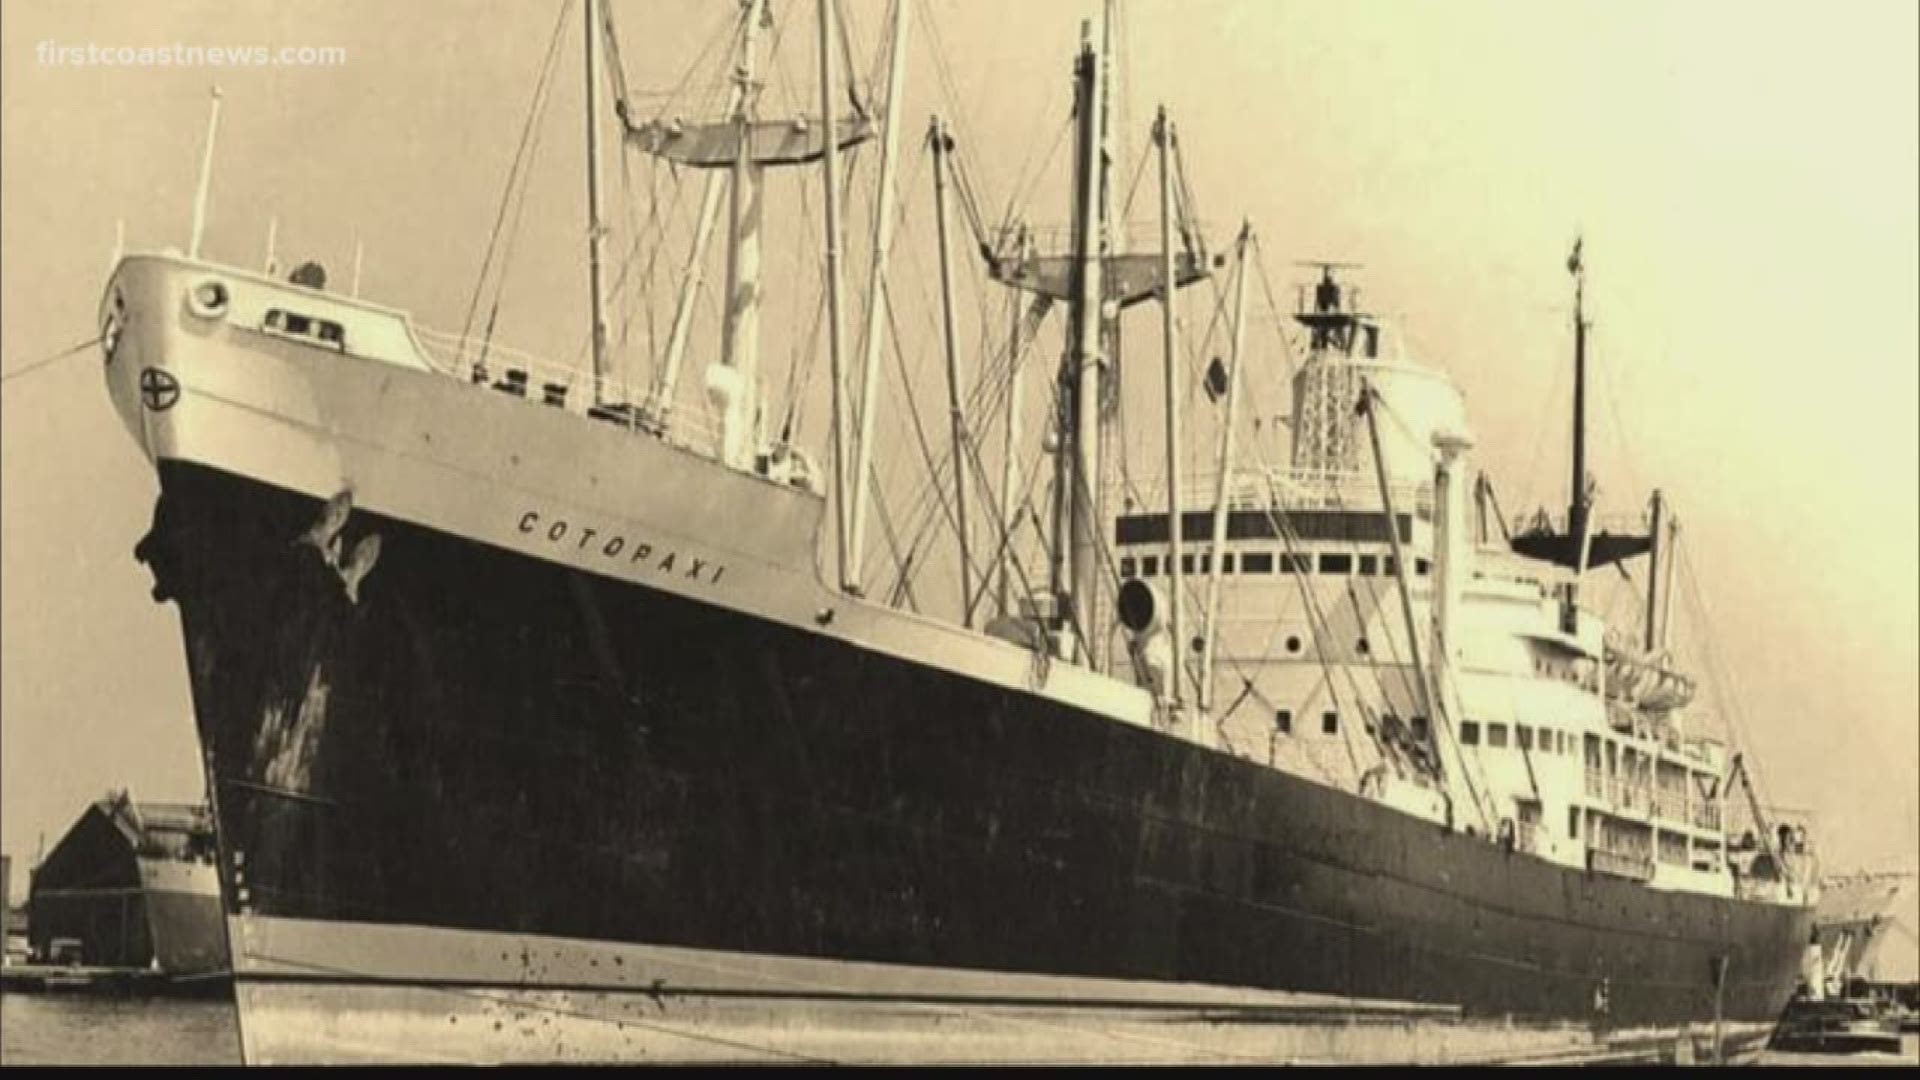 The ship was called the Cotopaxi. It was a 250-foot-long cargo steamship that sailed from Charleston, South Carolina, heading for Havana in 1925.